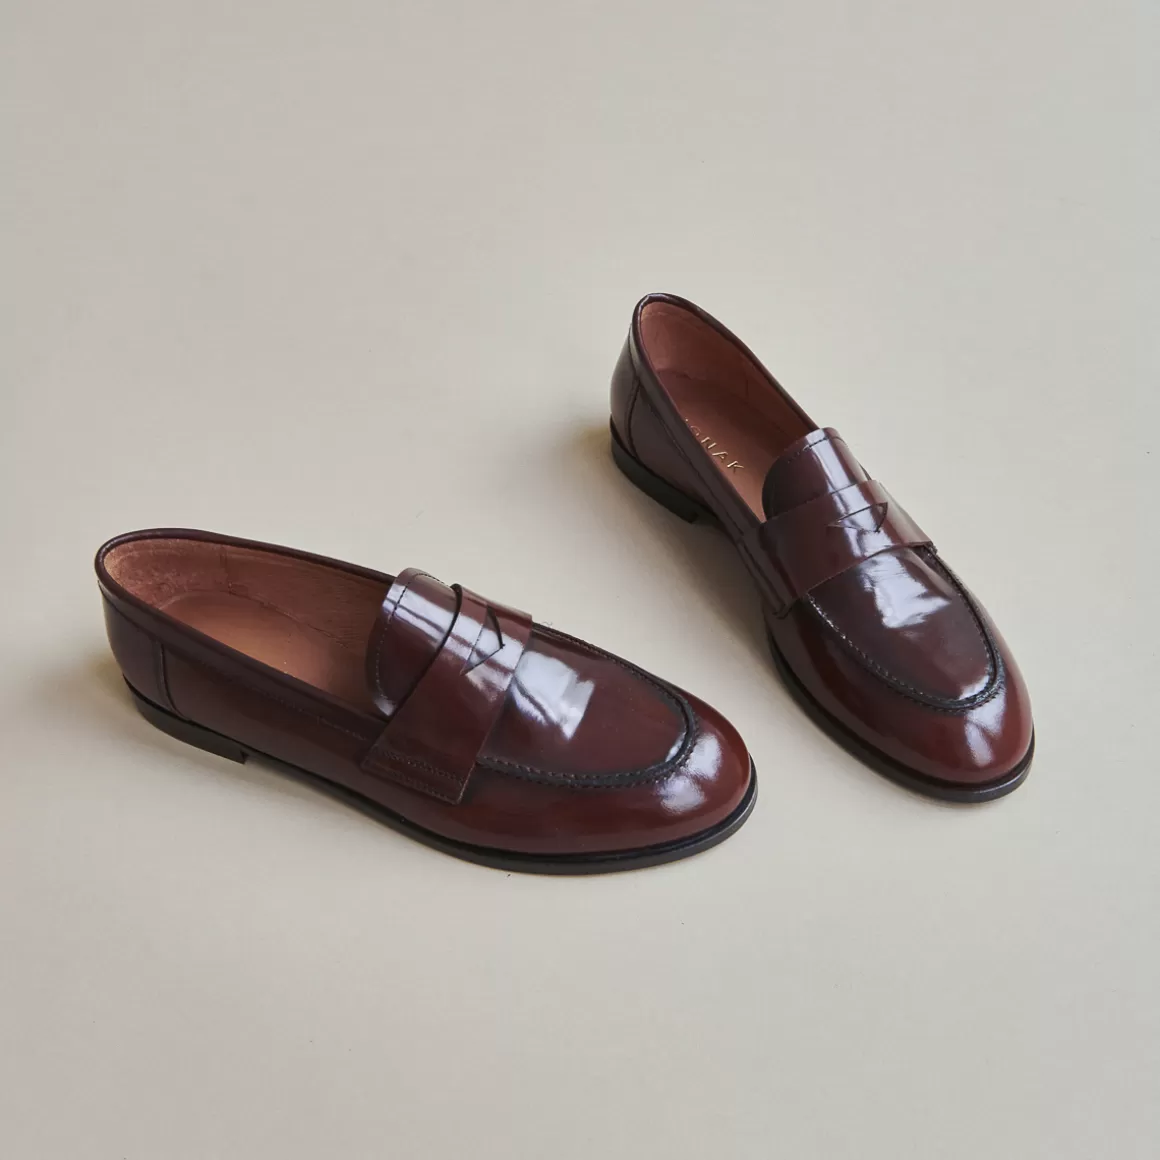 Round-toed loafers<Jonak Outlet